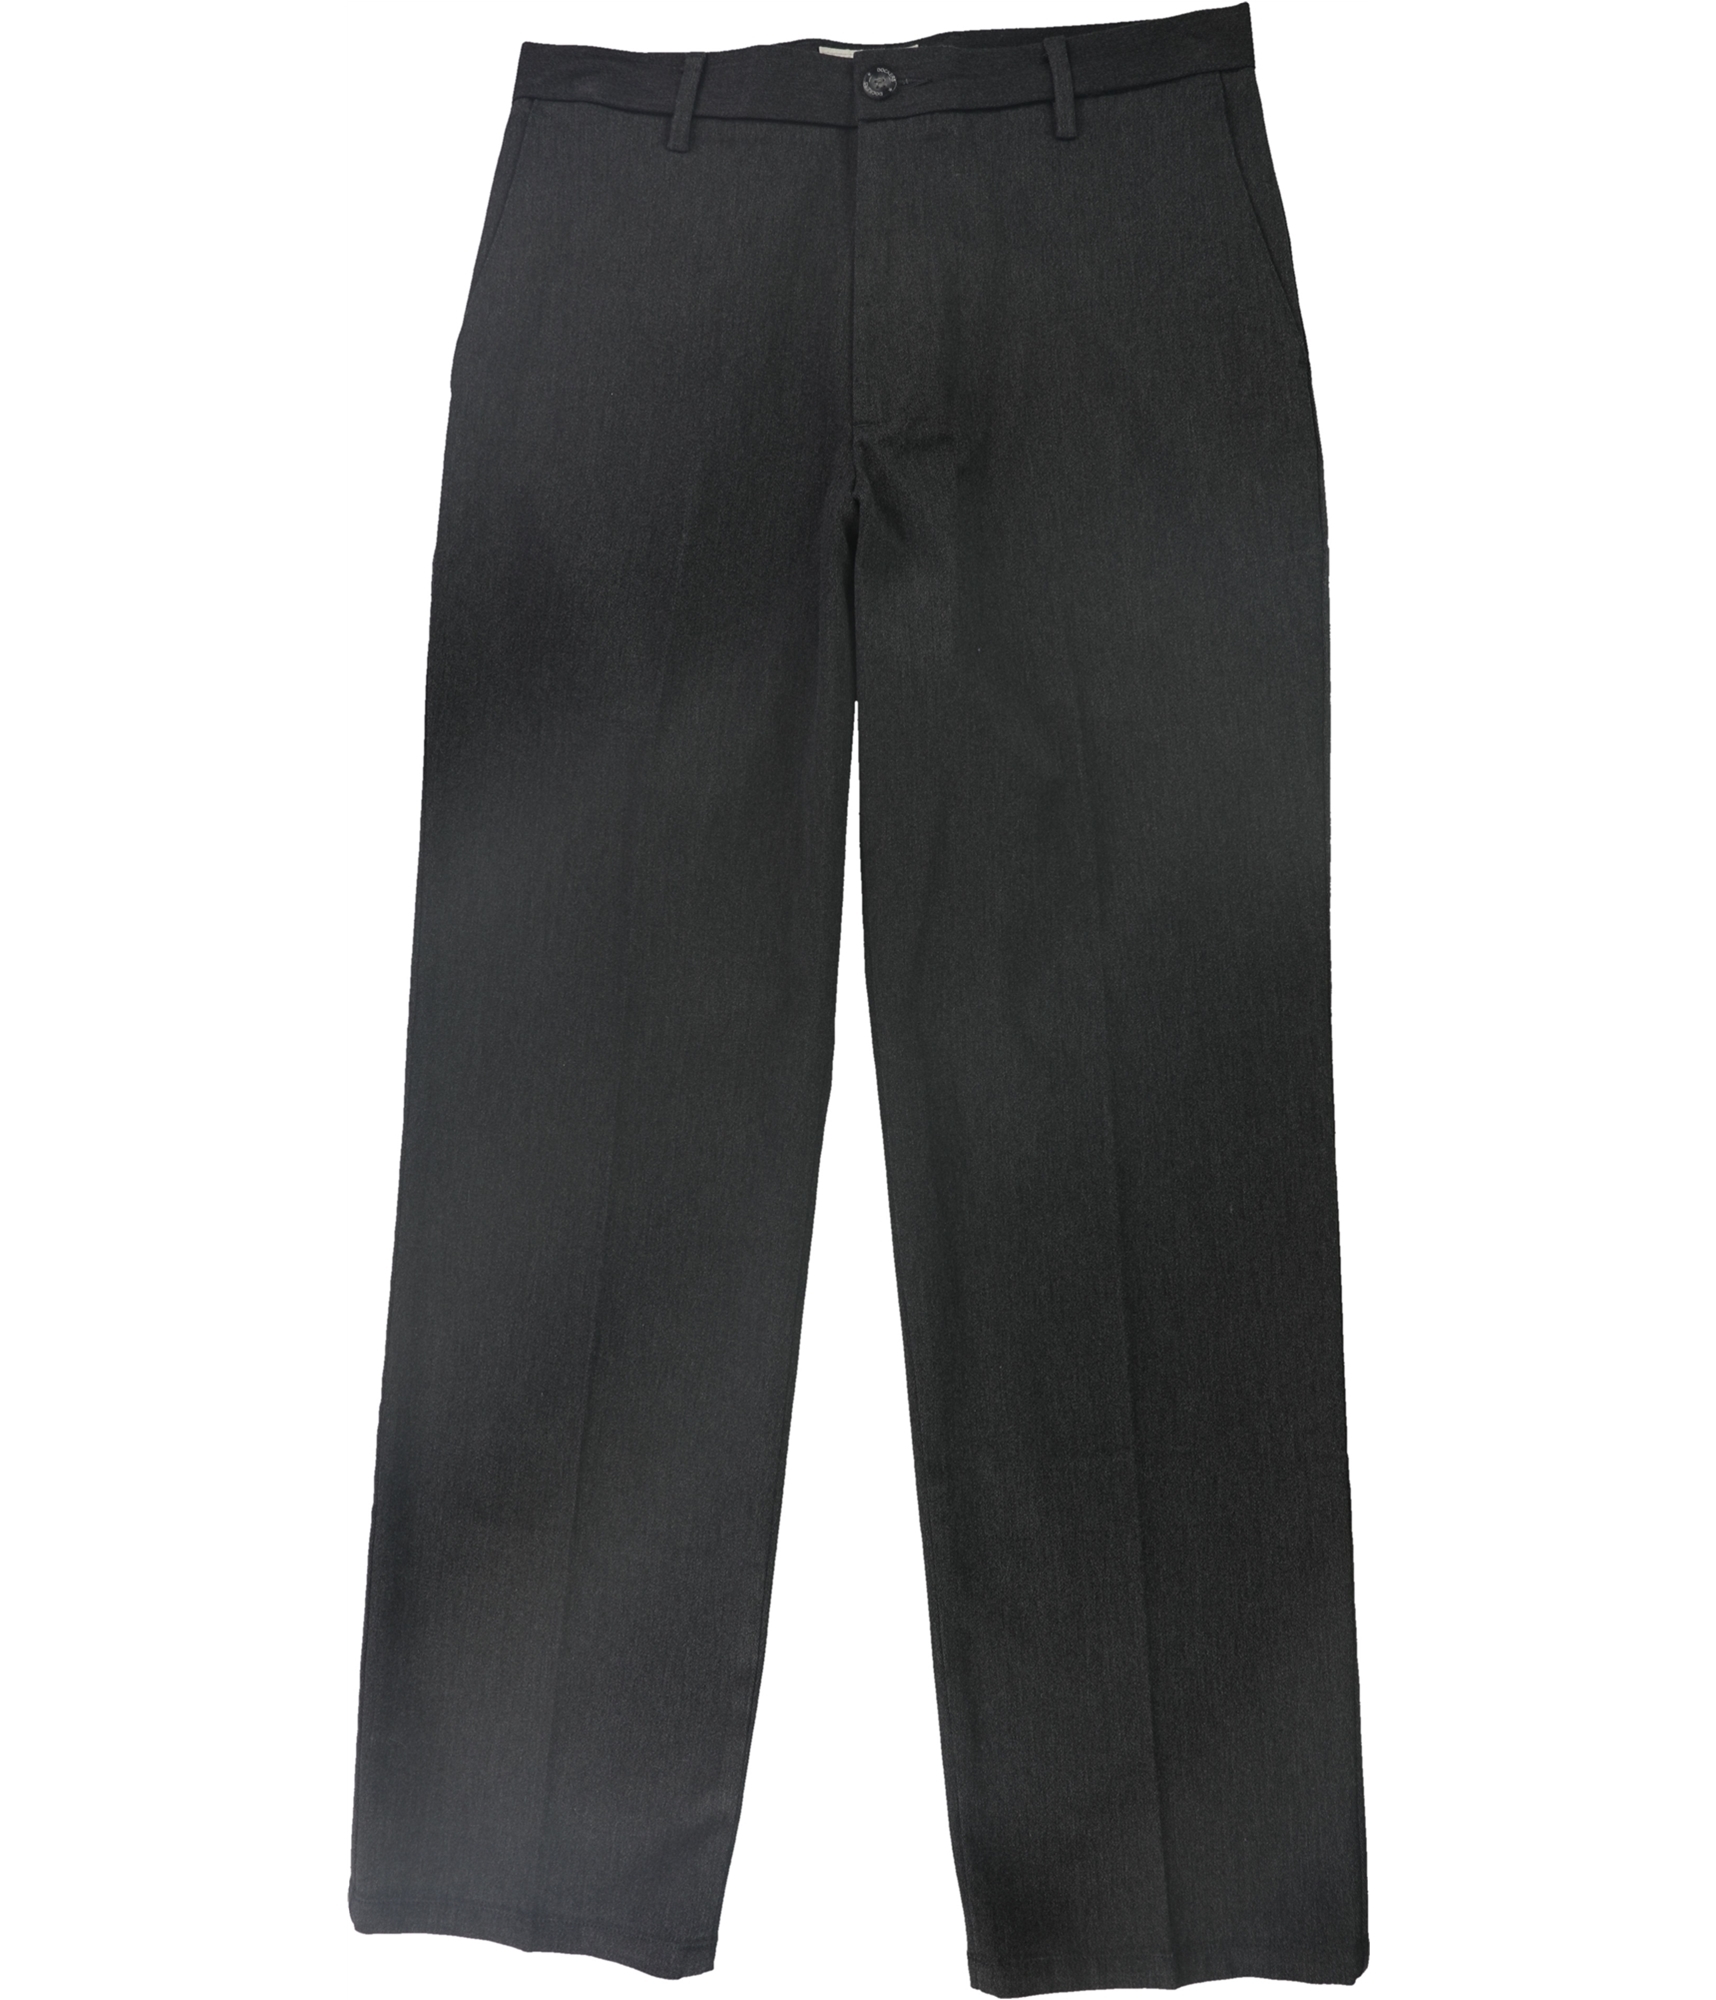 Buy a Mens Dockers Signature Casual Trouser Pants Online | TagsWeekly ...